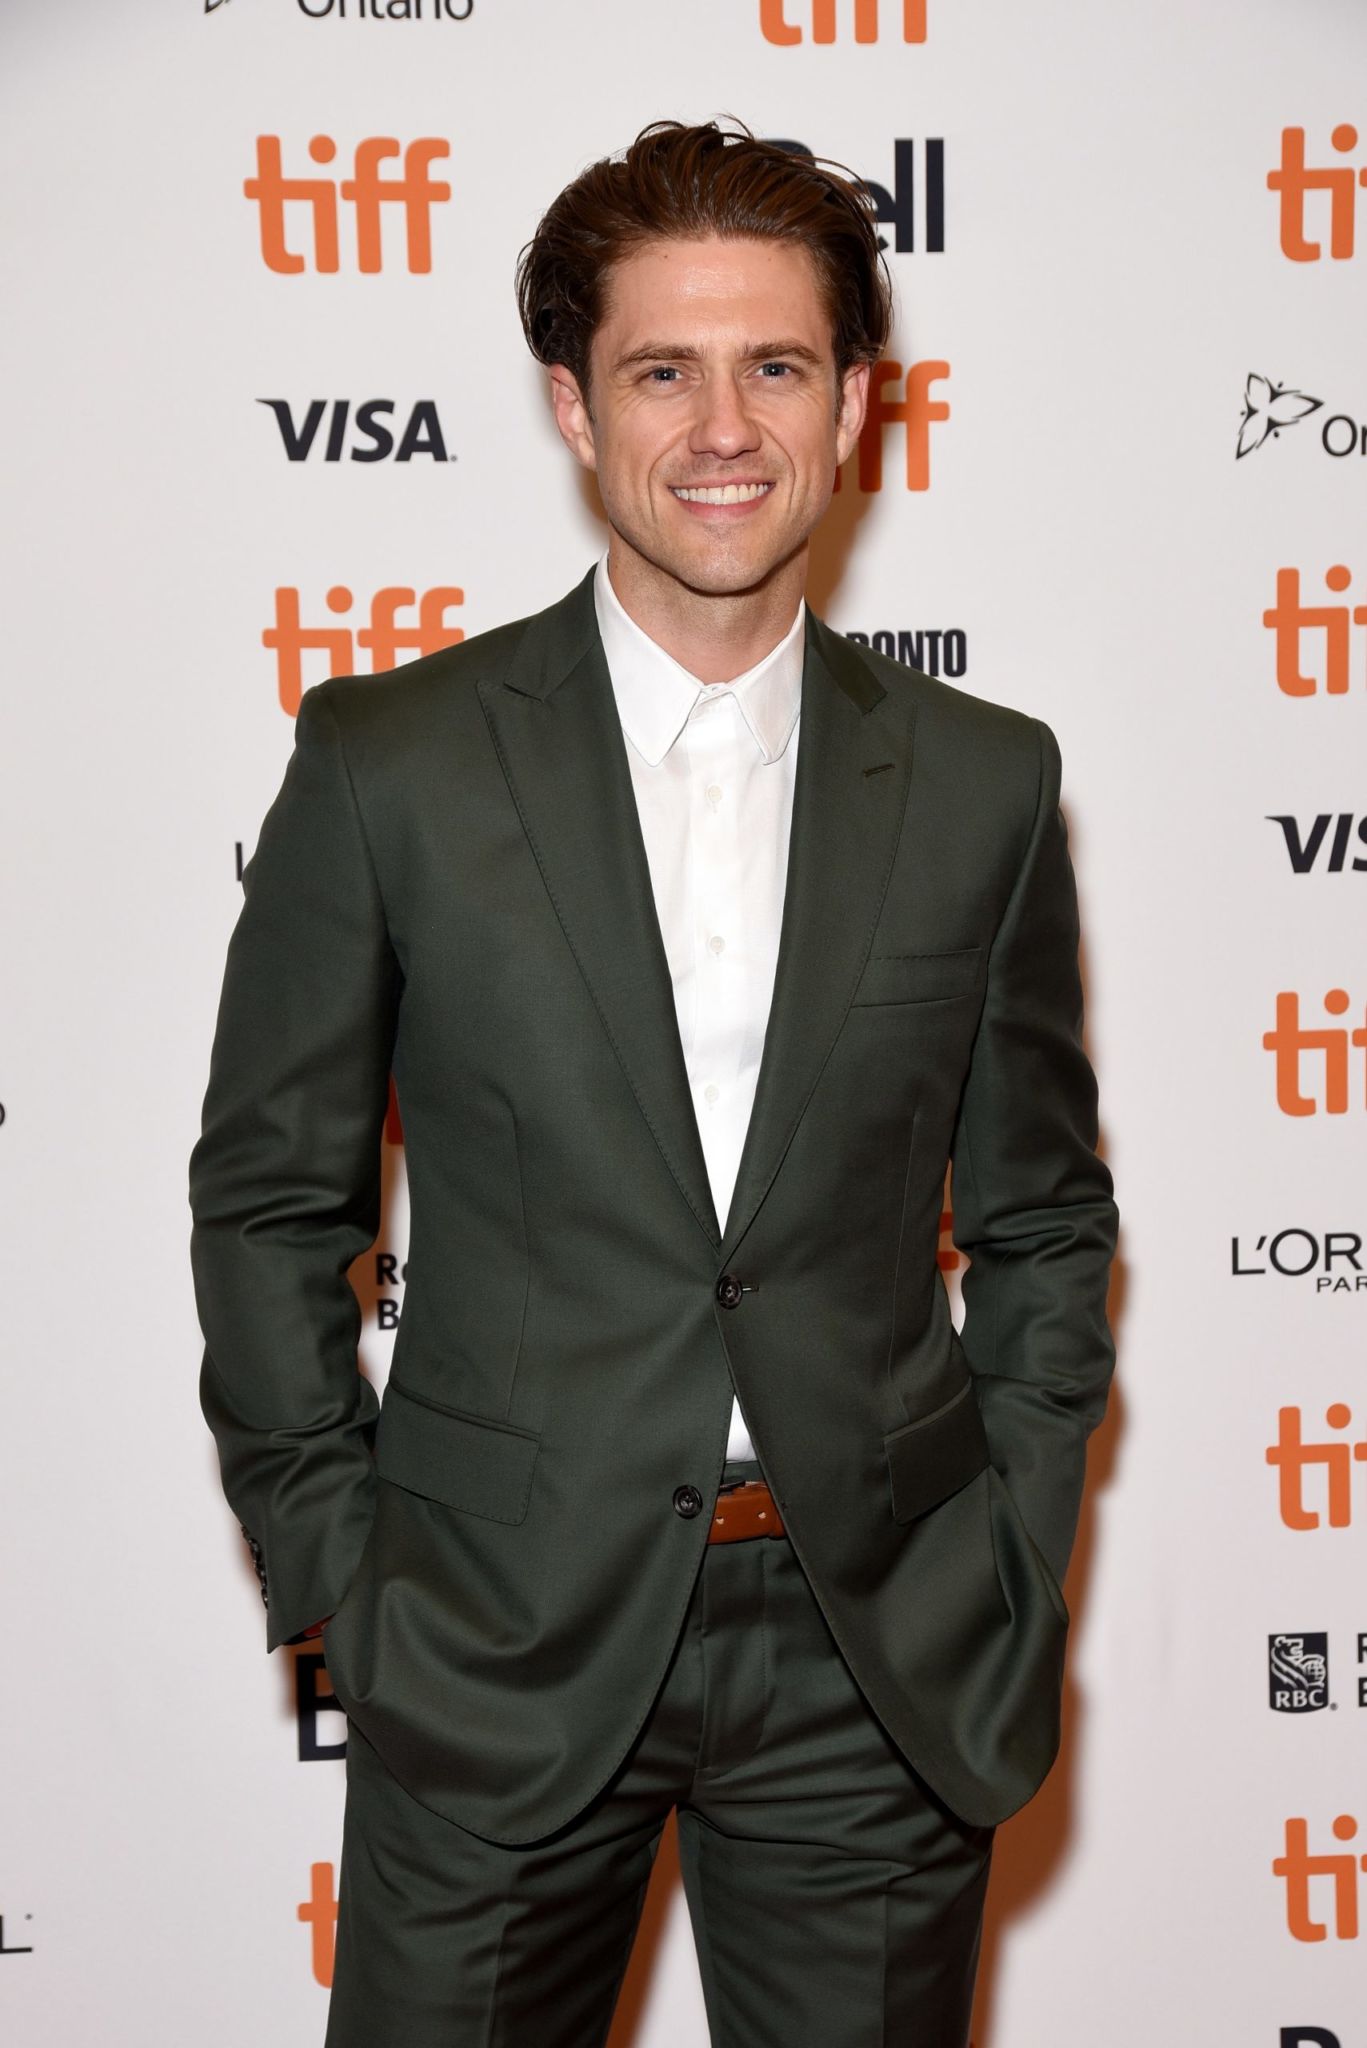 Aaron Tveit attends the 'Out Of Blue' premiere during 2018 Toronto International Film Festival